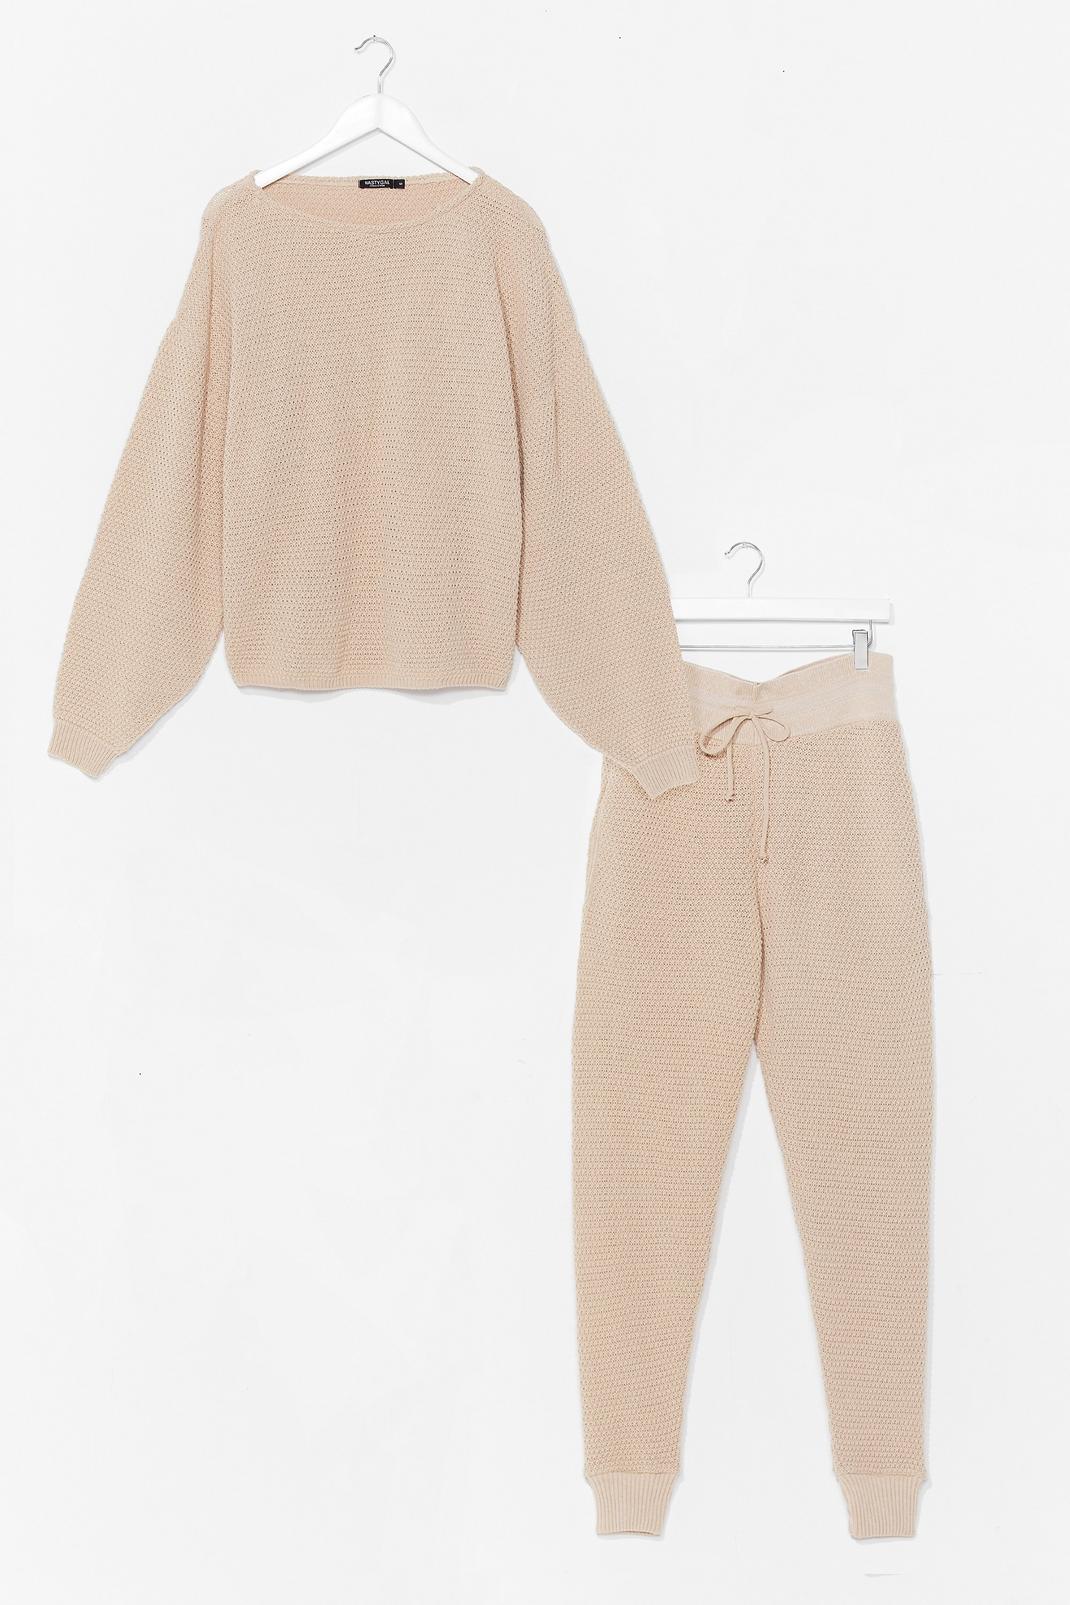 Oatmeal Knit Off the Shoulder Sweater and Sweatpants Set image number 1